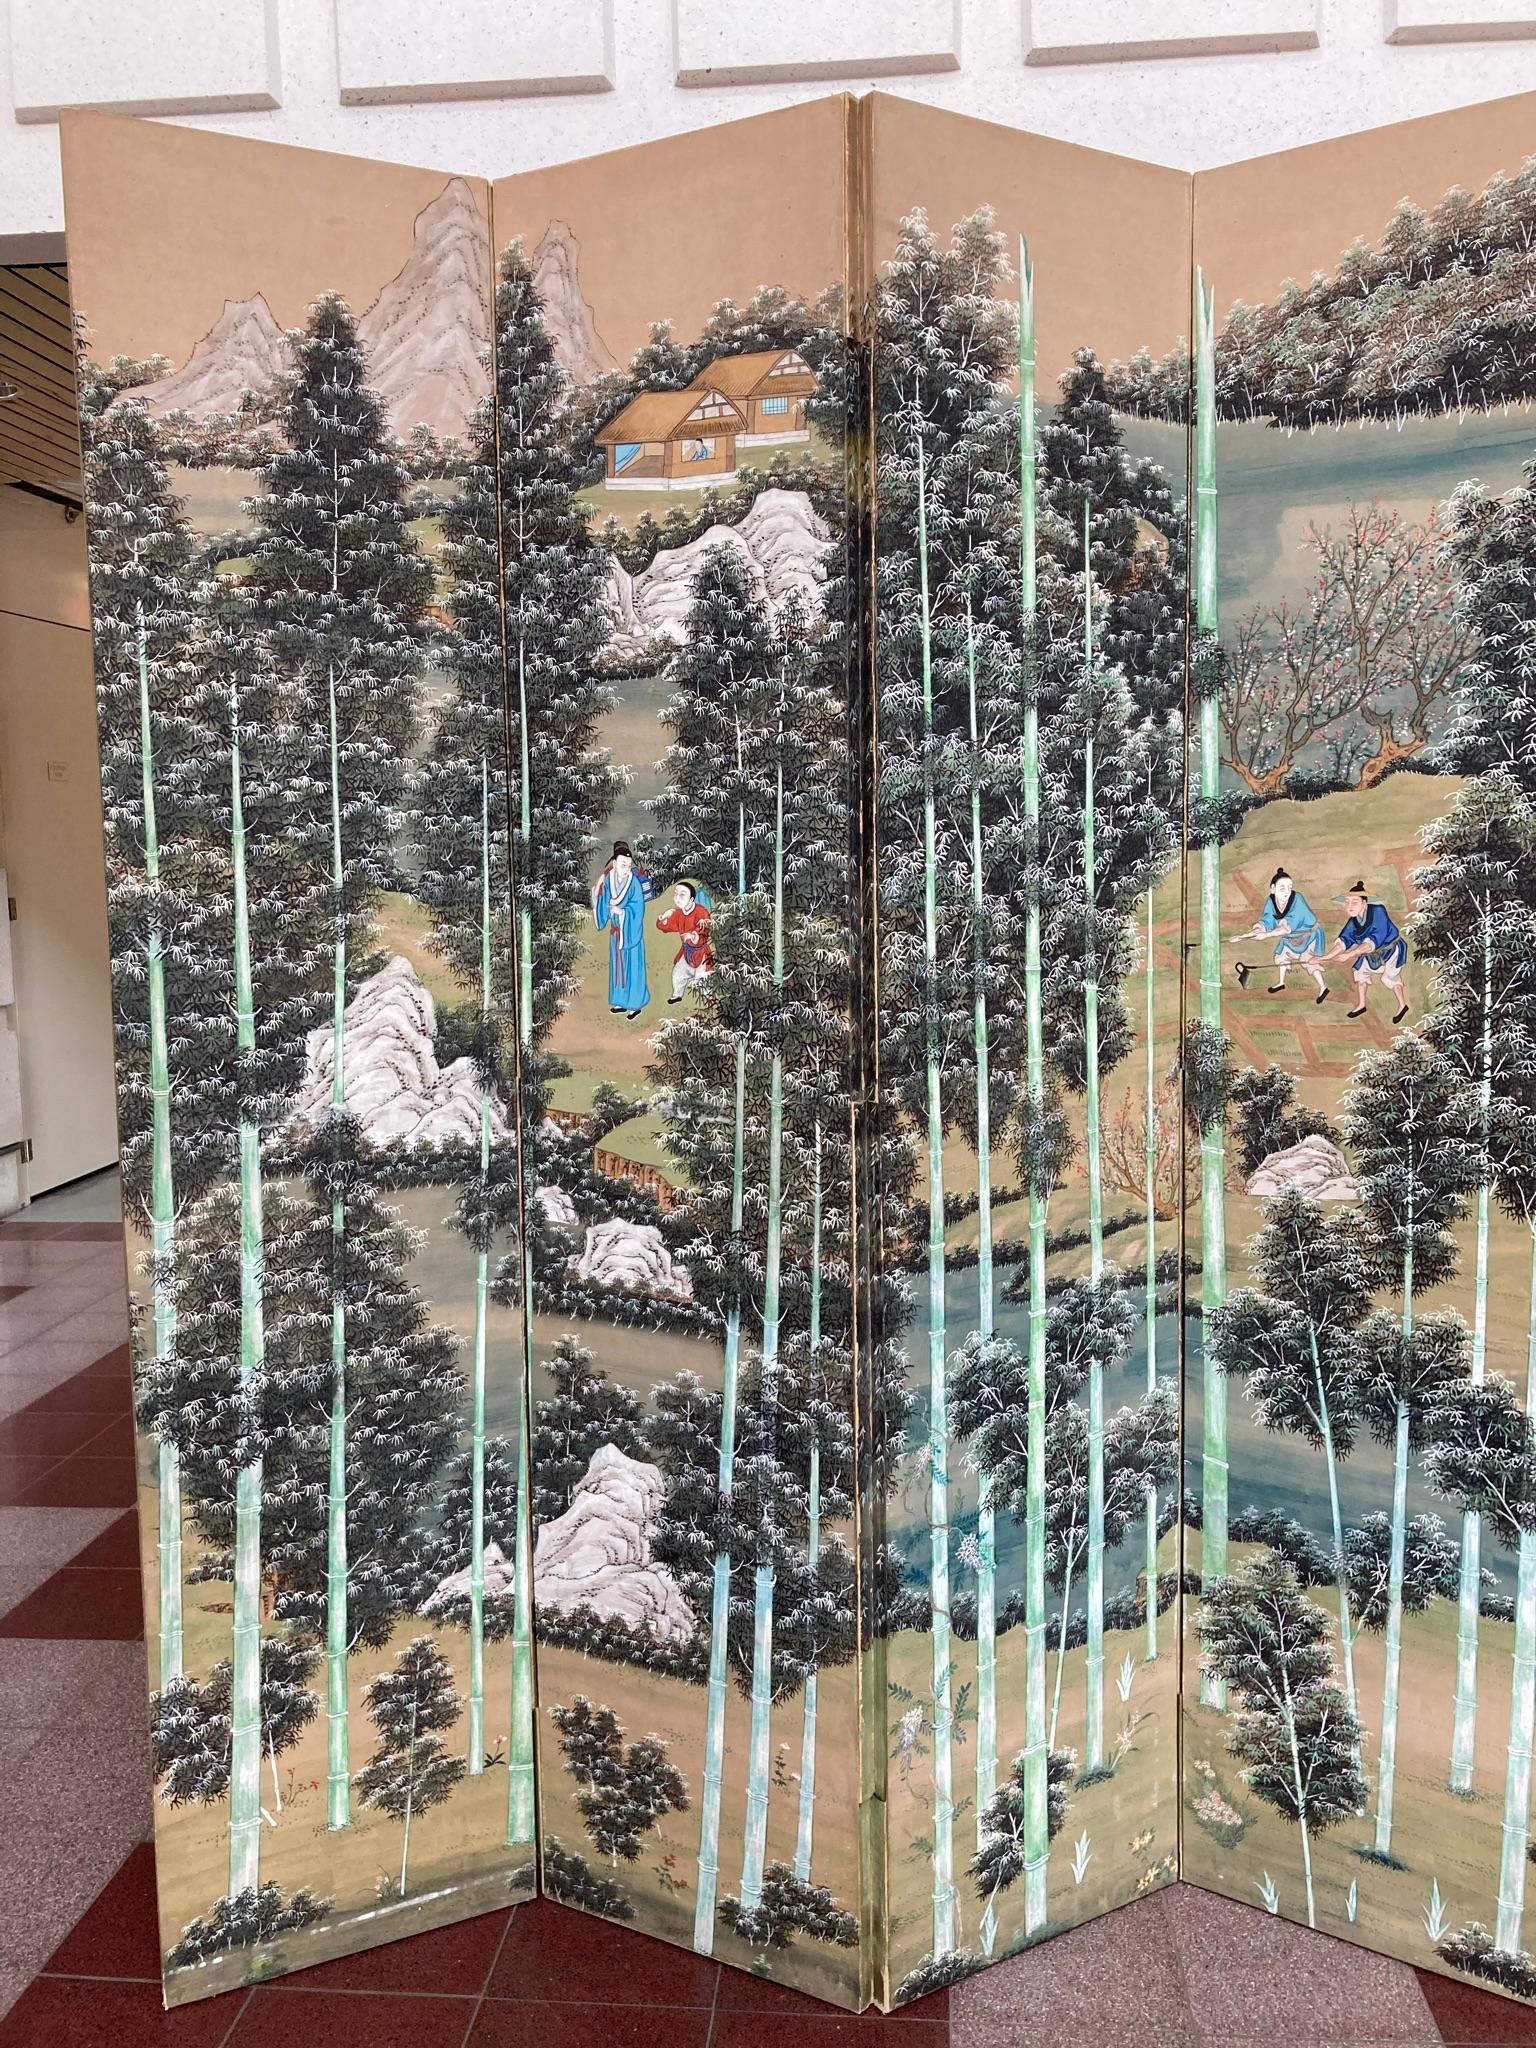 Impressive large-scale Chinese hand-painted six-panel screen depicting a bamboo forest interspersed with groups of figures, houses and rock outcroppings. Hand painted paper, the vertical lines of the bamboo trees give this screen a very modern feel.